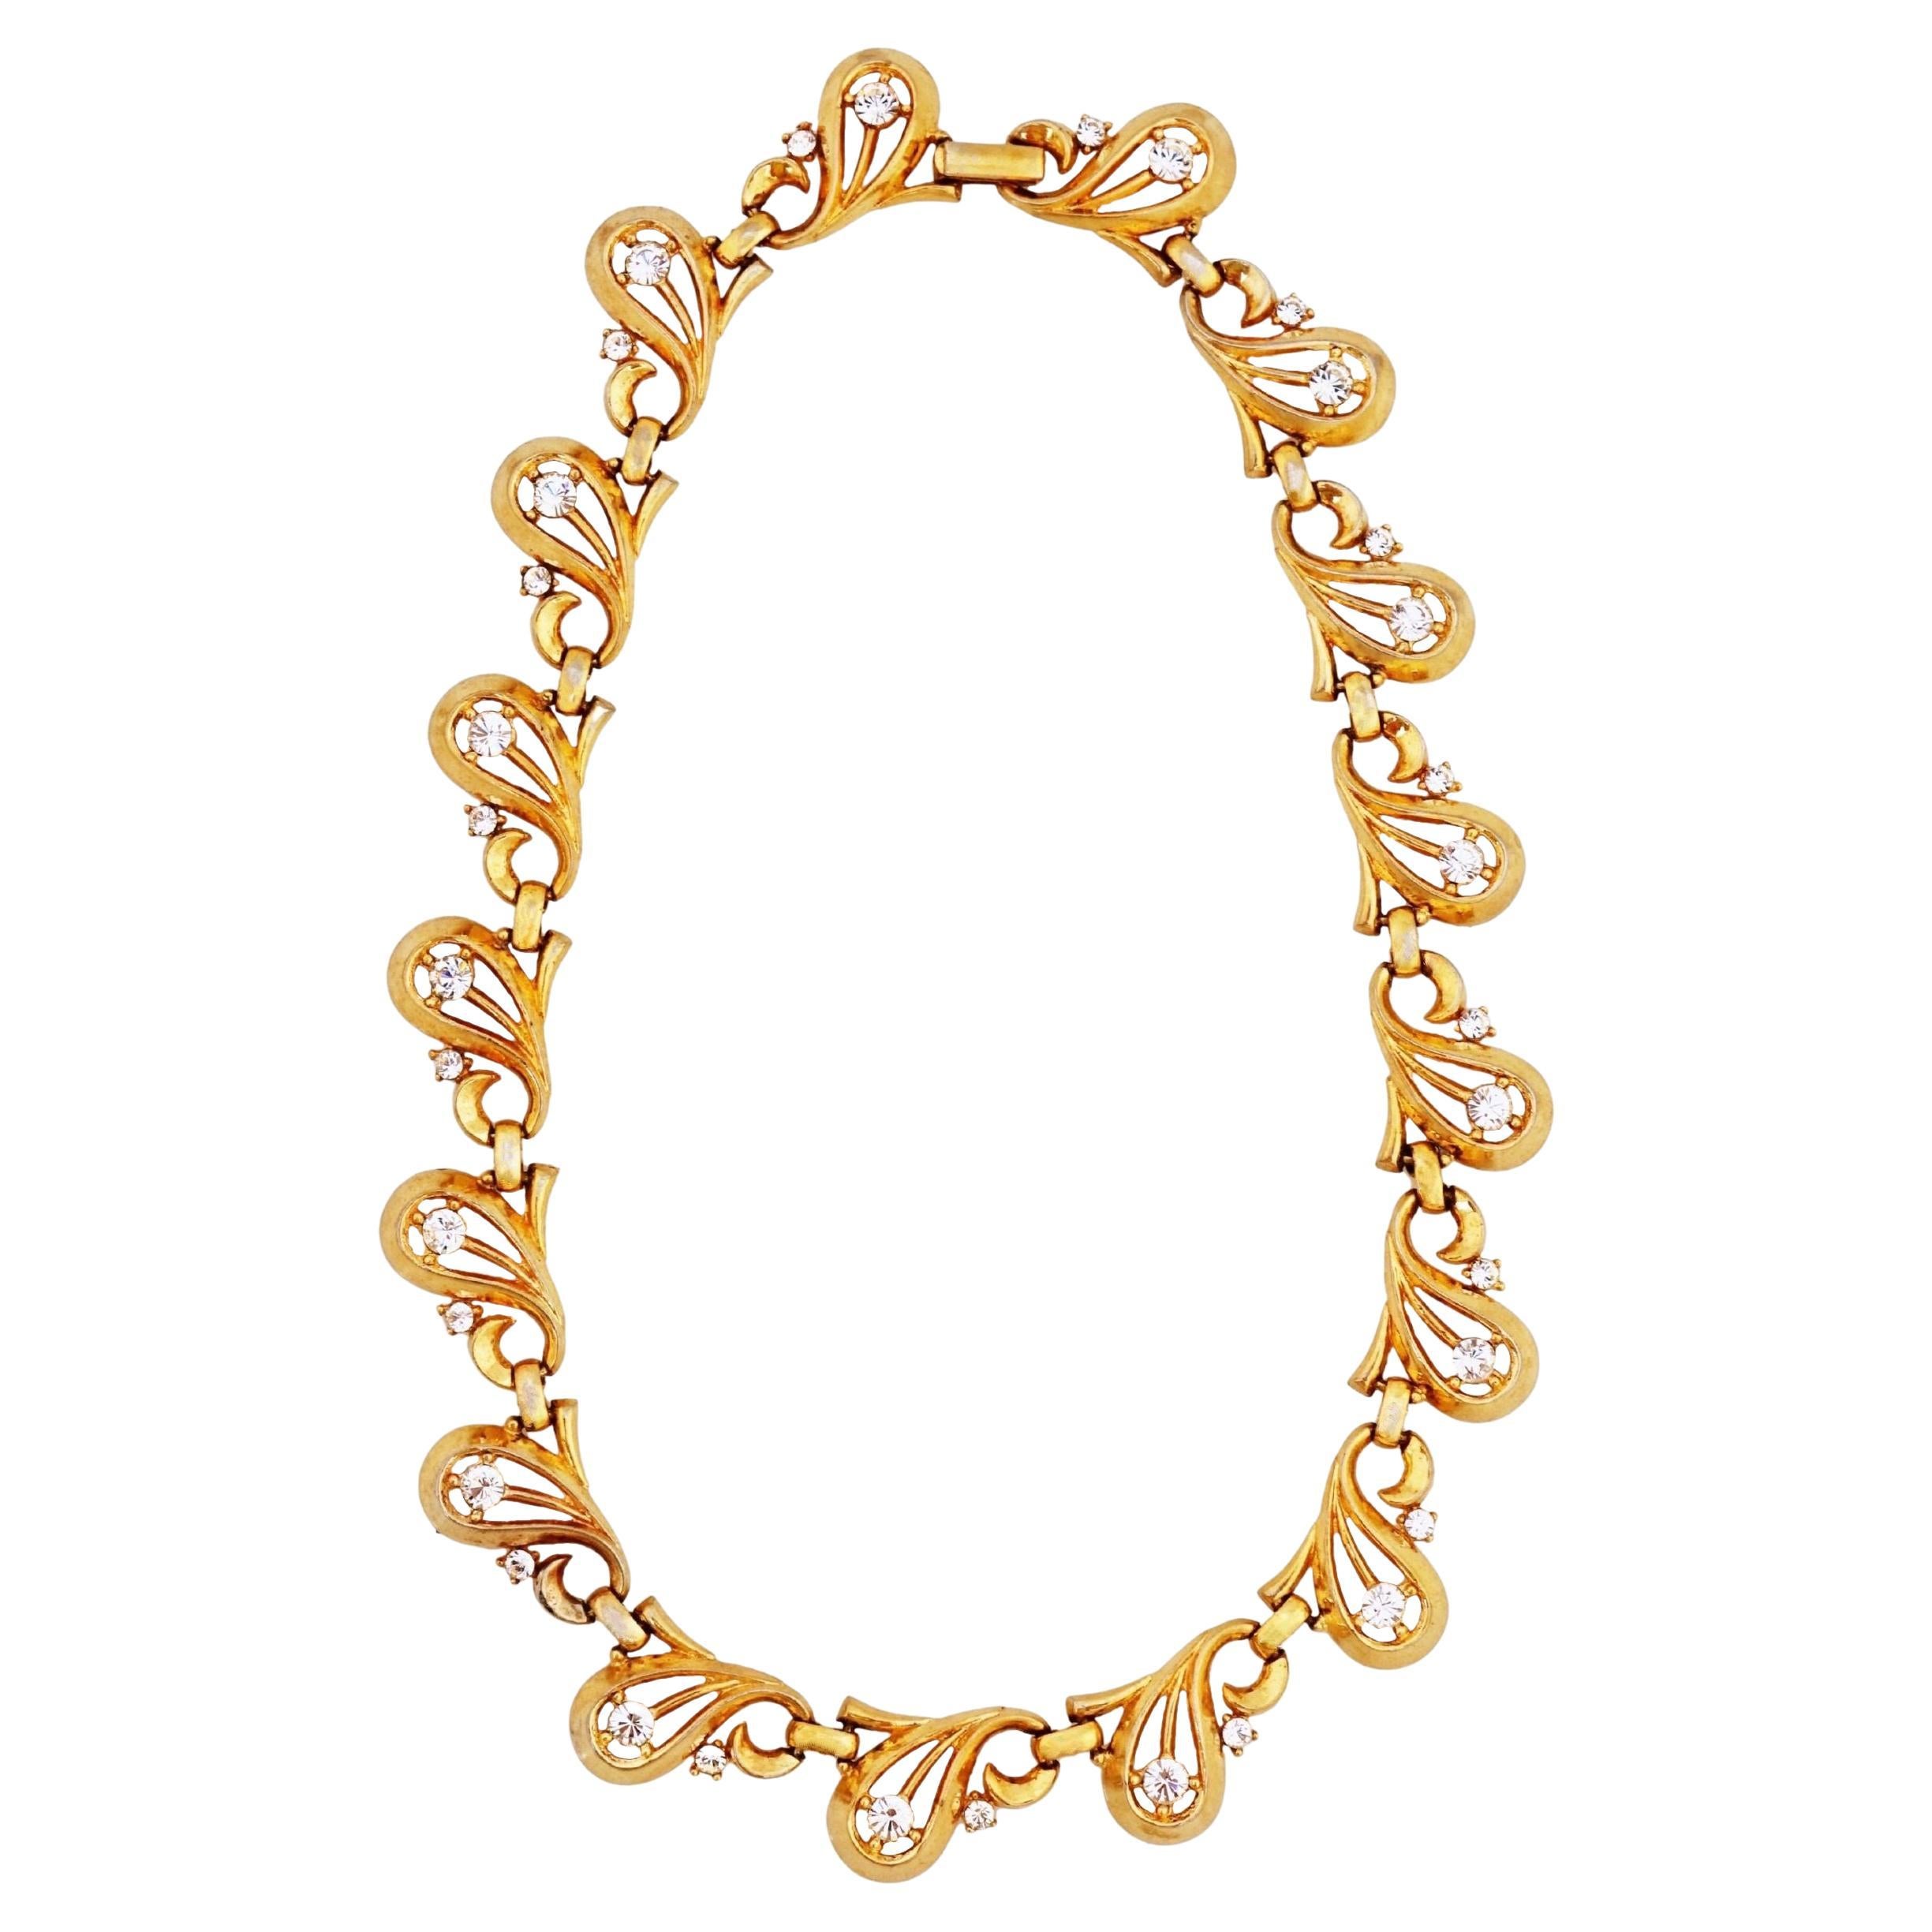 1940s Art Nouveau Teardrop Link Choker Necklace By Alfred Philippe For Trifari For Sale